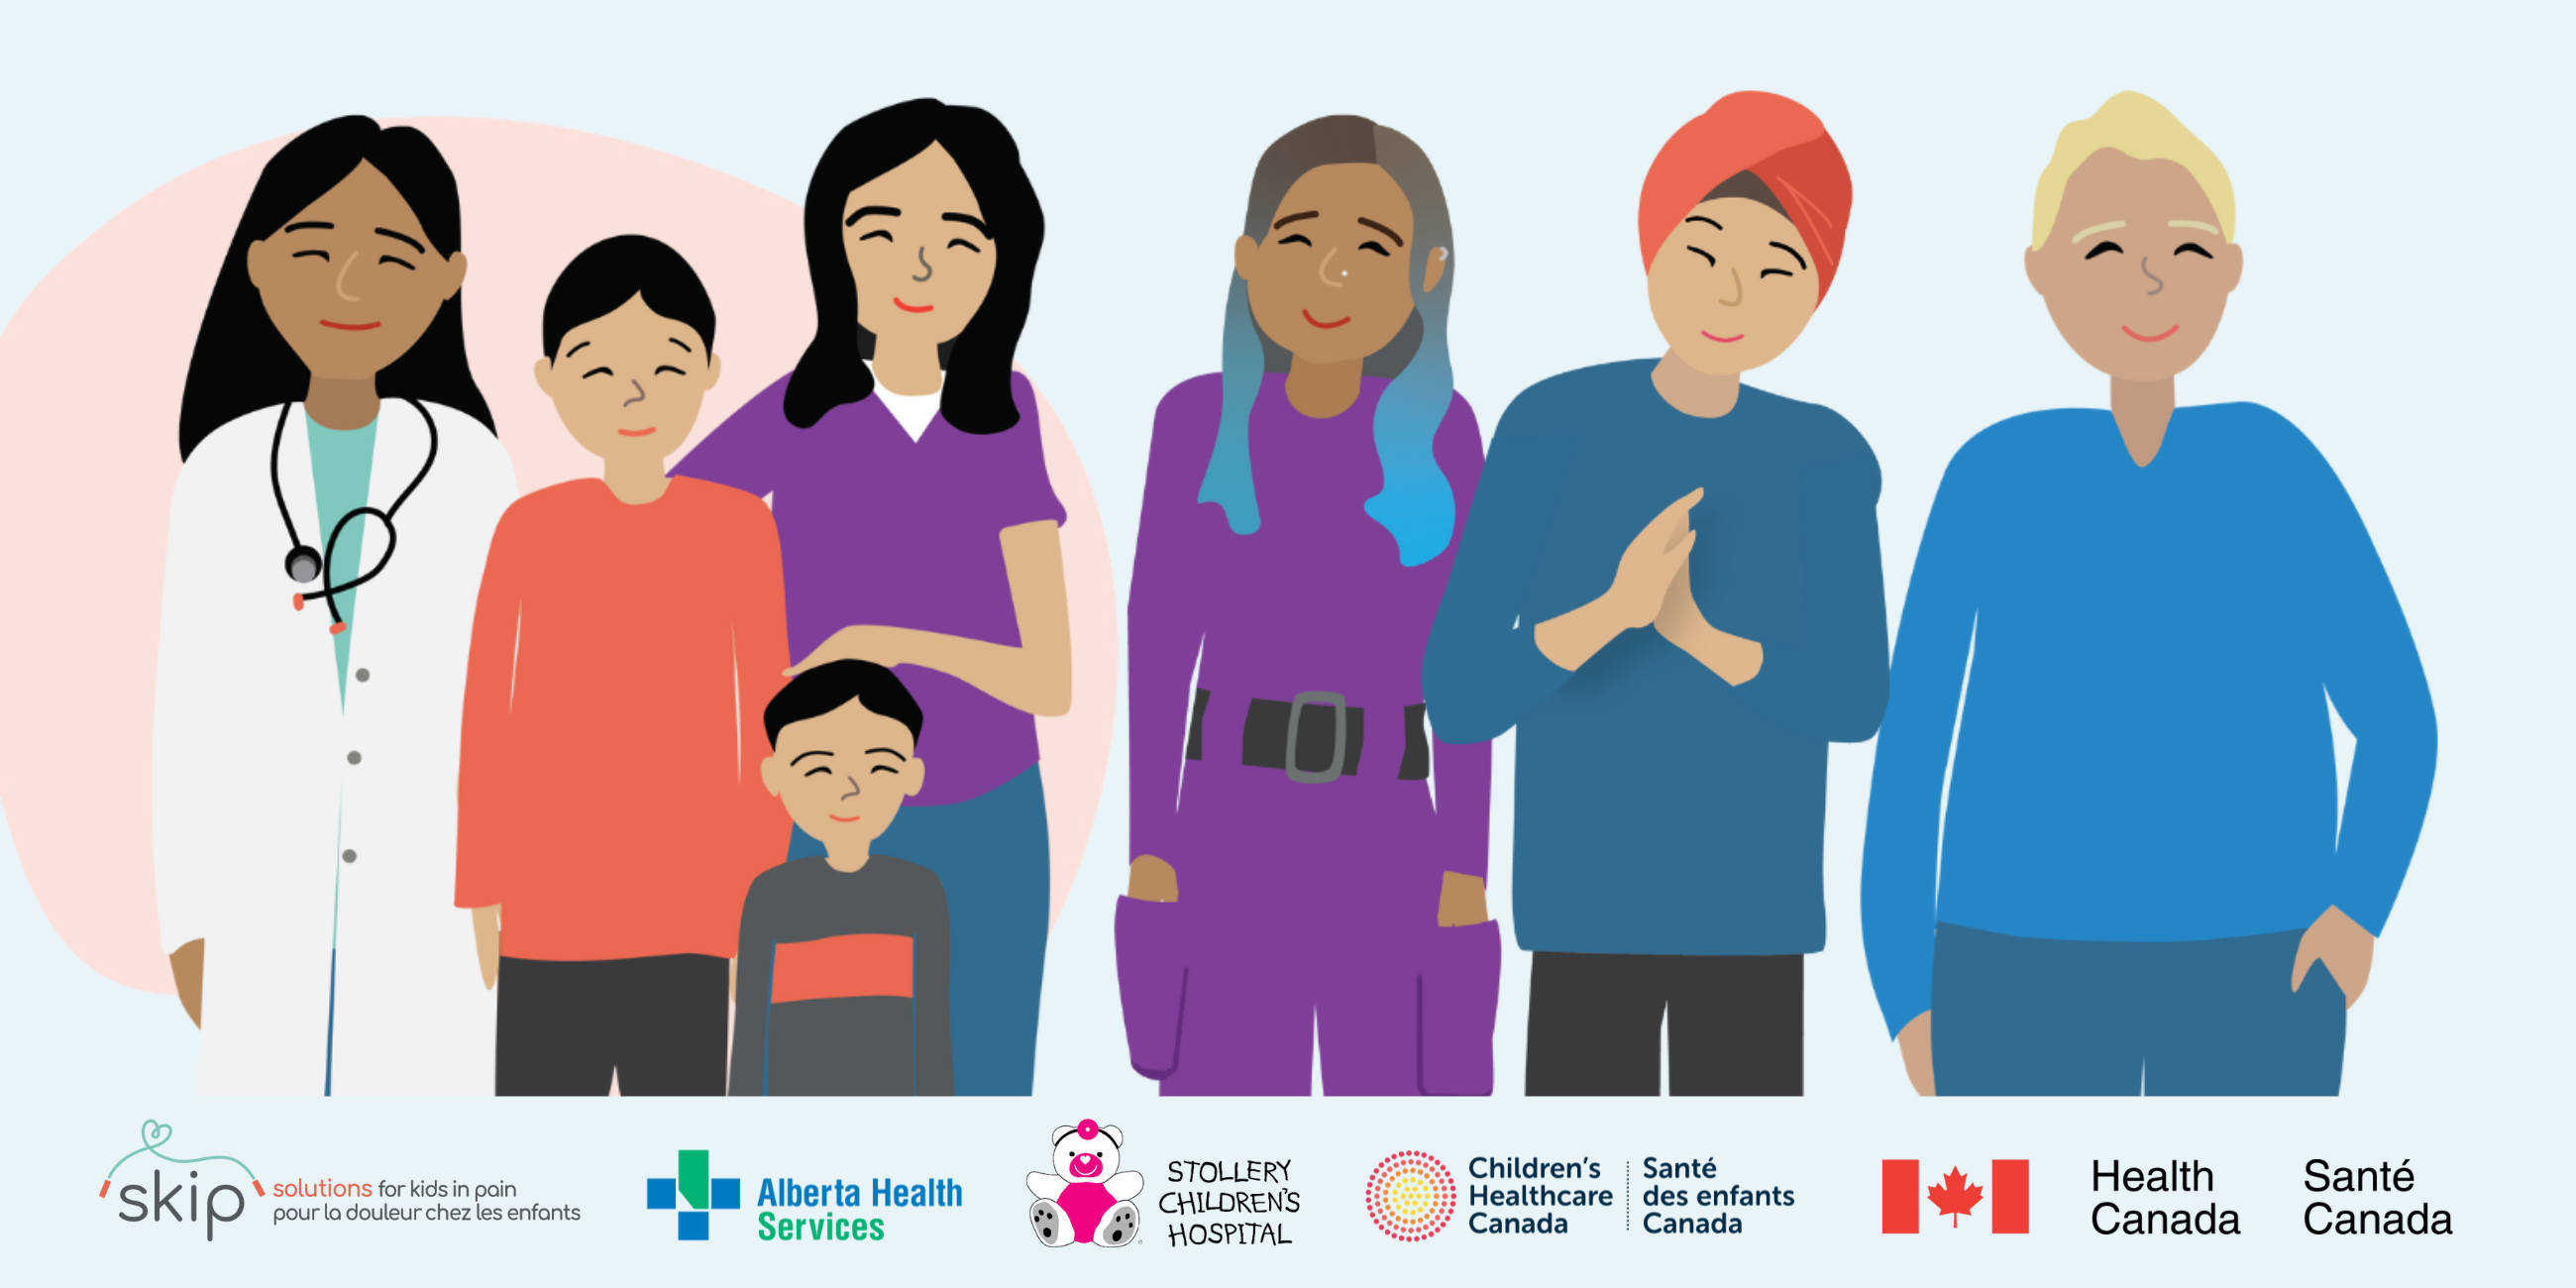 illustration of youth, children, and health care professionals